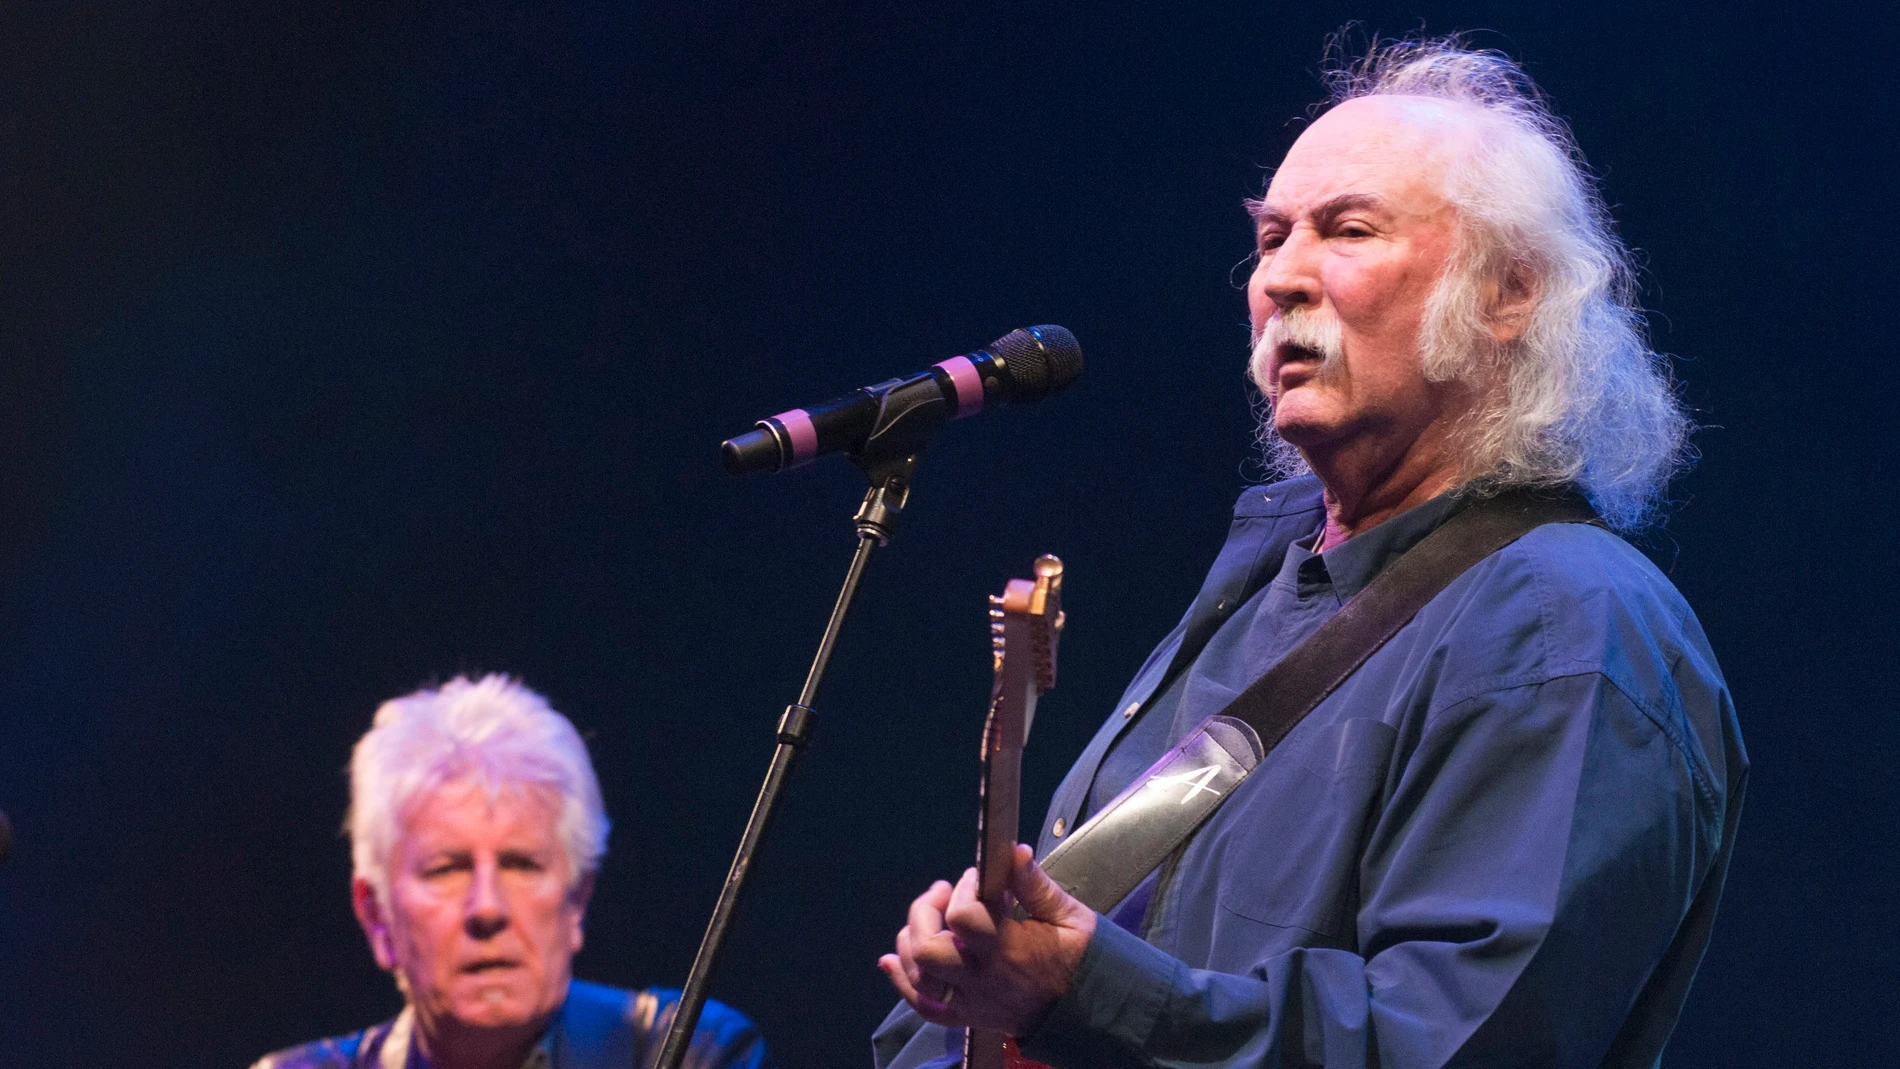 Tucson (United States).- (FILE) - US musicians David Crosby (R) and Graham Nash (L) perform at a benefit concert in Tucson, USA, on 10 March 2011 (reissued 19 January 2023). Crosby, the singer-songwriter who cofounded The Byrds and Crosby, Stills & Nash, has died at the the age of 81 his publicist has confirmed. (Estados Unidos) EFE/EPA/GARY WILLIAMS *** Local Caption *** 02627006